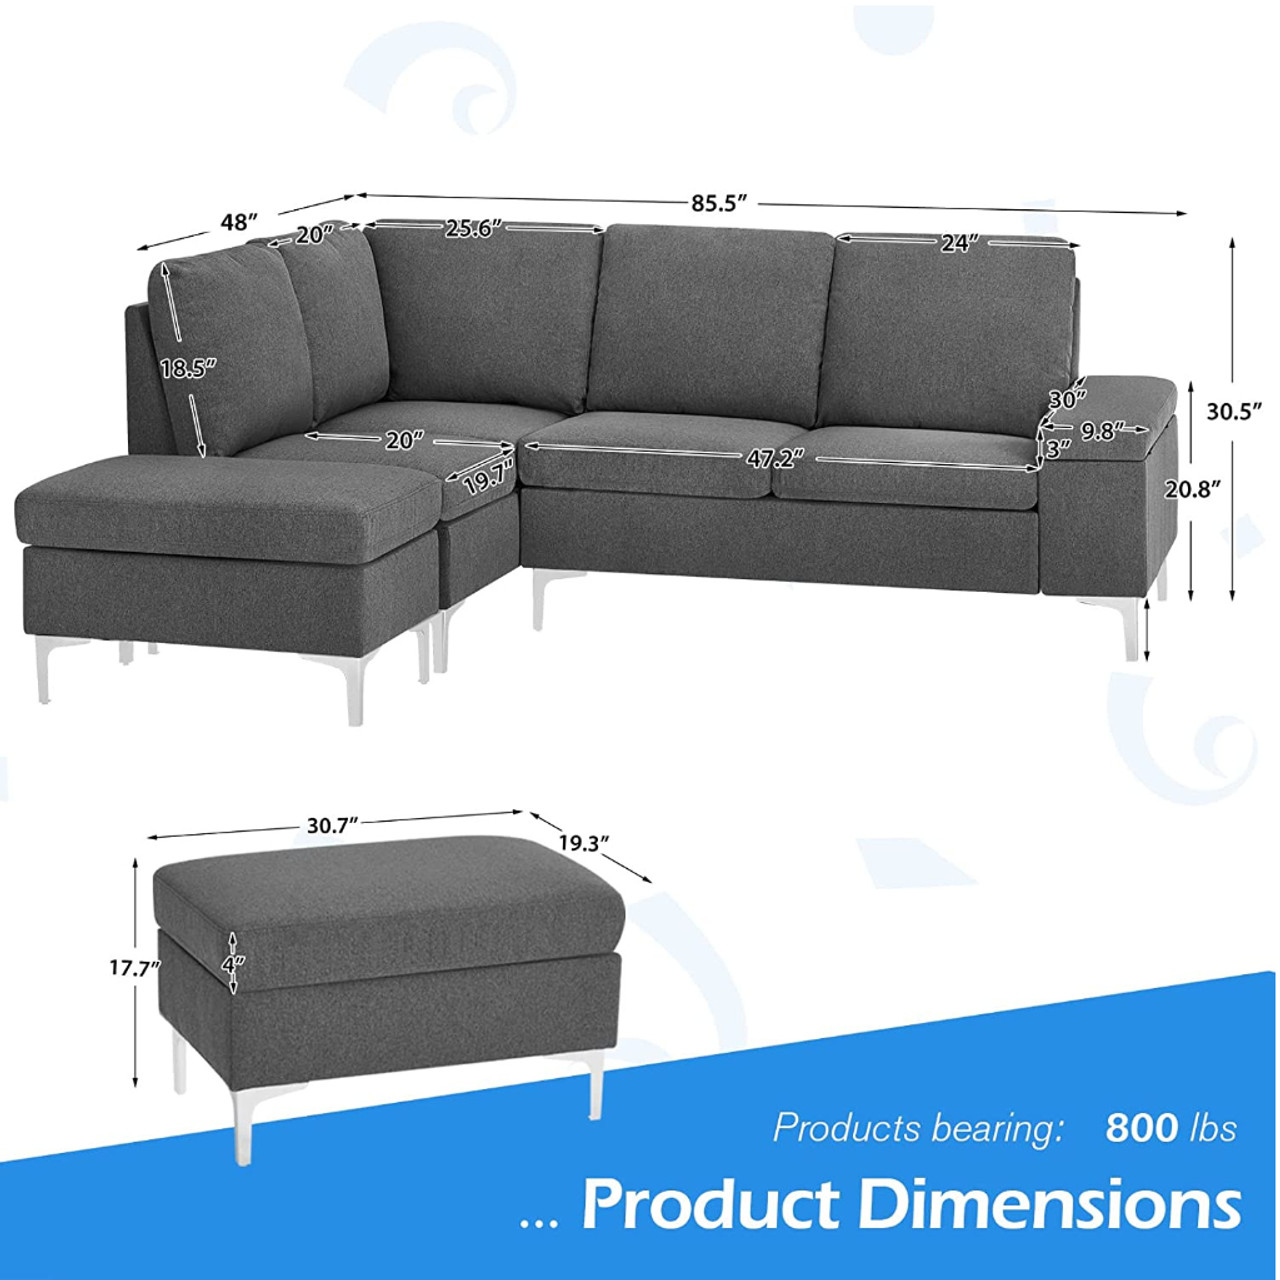 Convertible 3-Seat Sectional Sofa with Storage Space product image